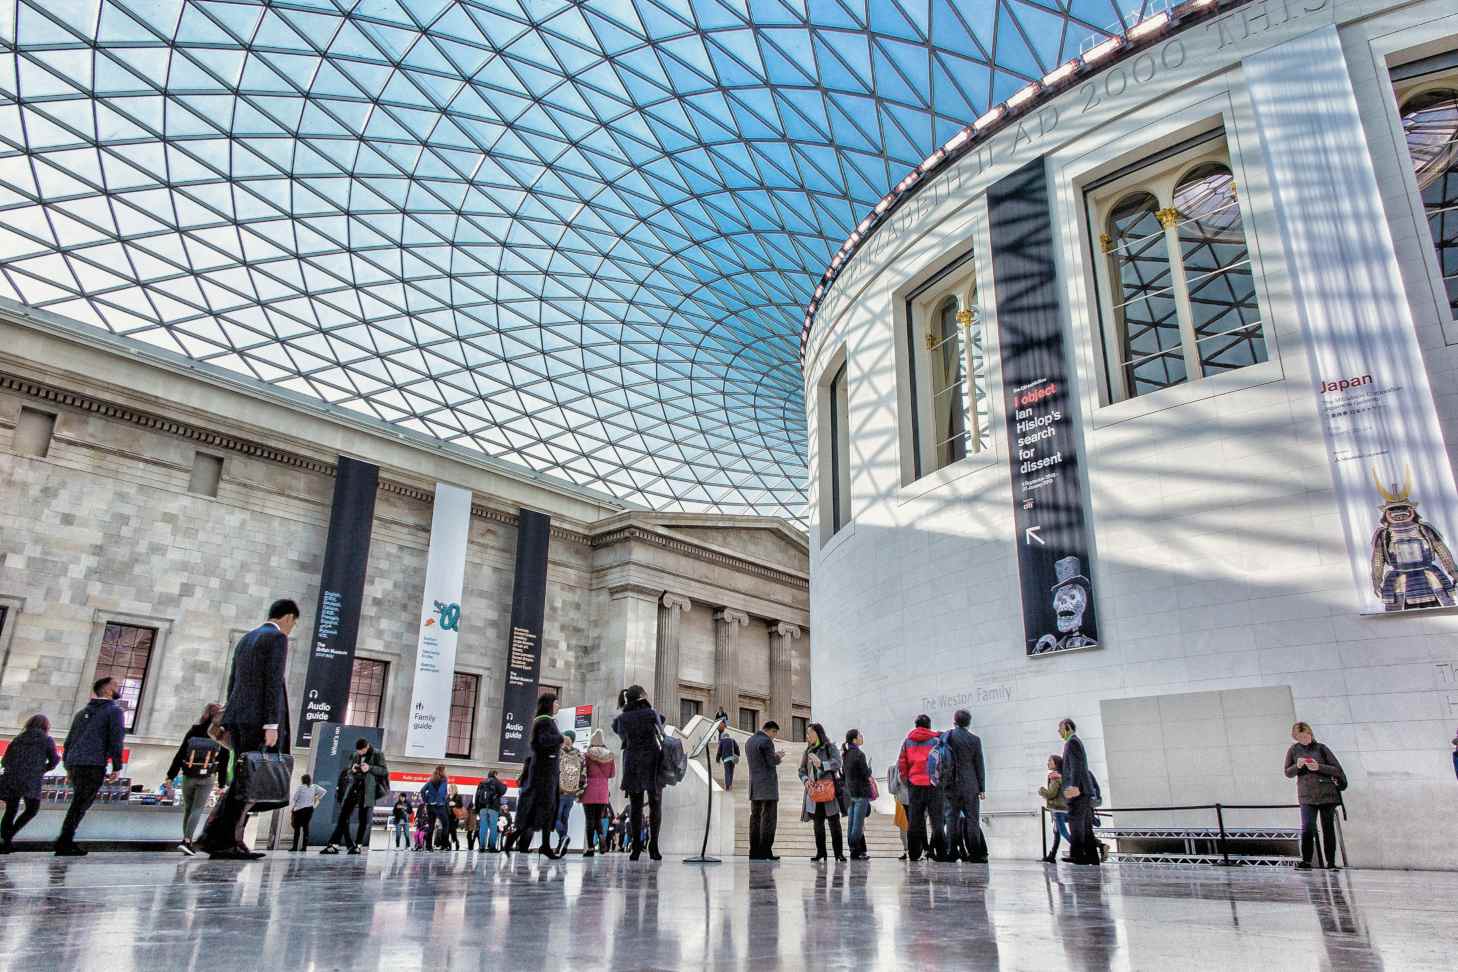 People walking around the Great Court of the British Museum, London